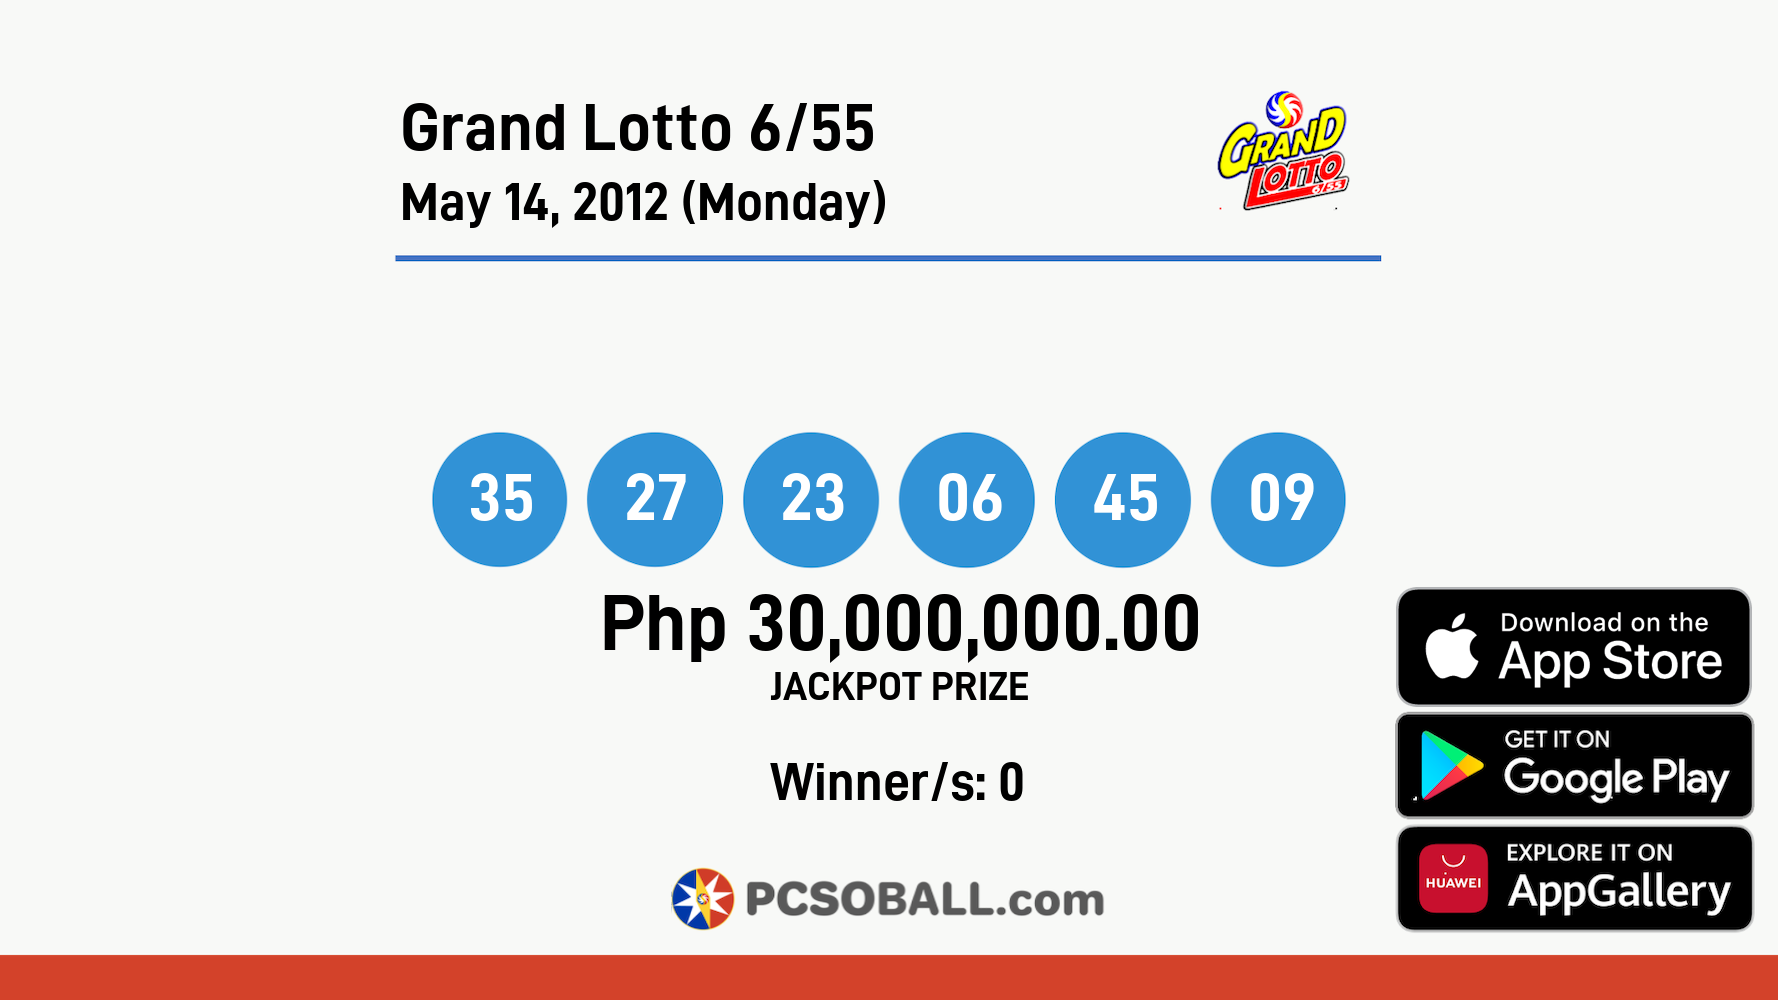 Grand Lotto 6/55 May 14, 2012 (Monday) Result